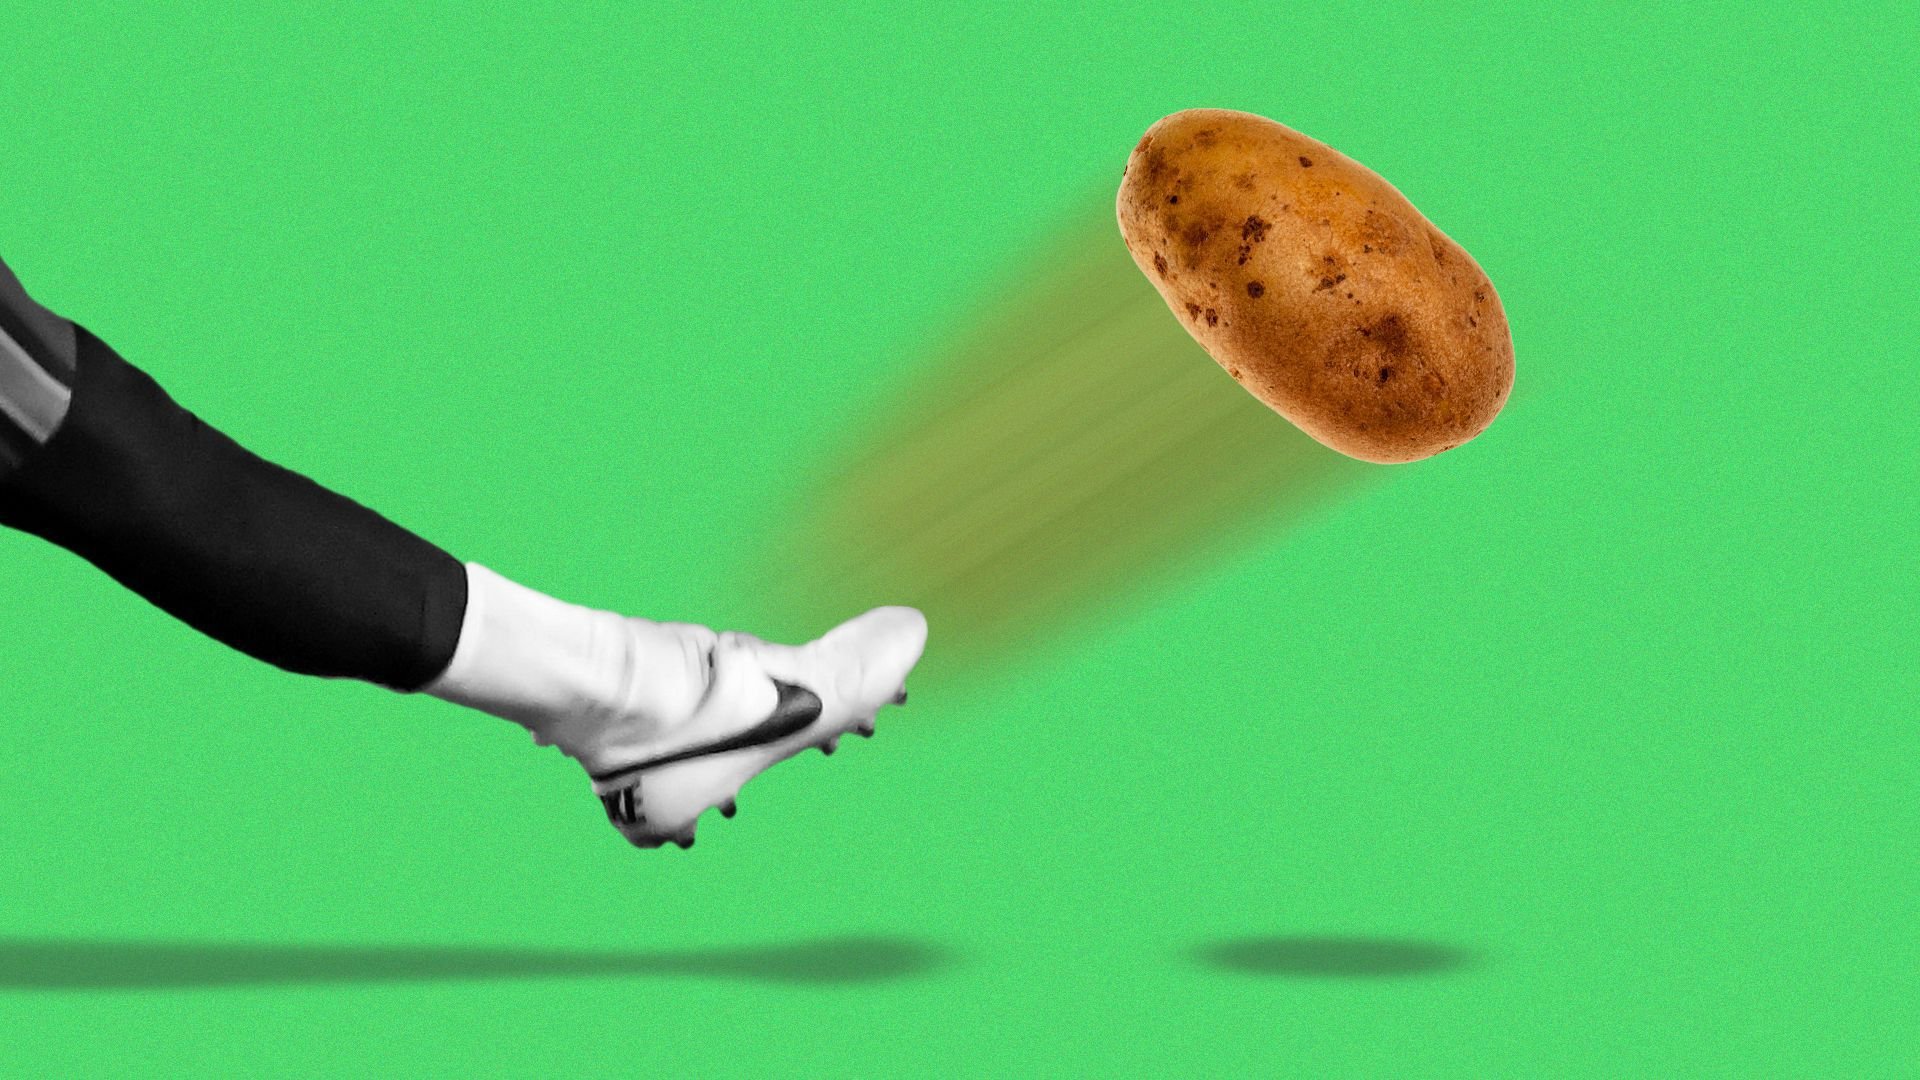 Mashed potatoes are among Tampa Bay's favorite sports snacks